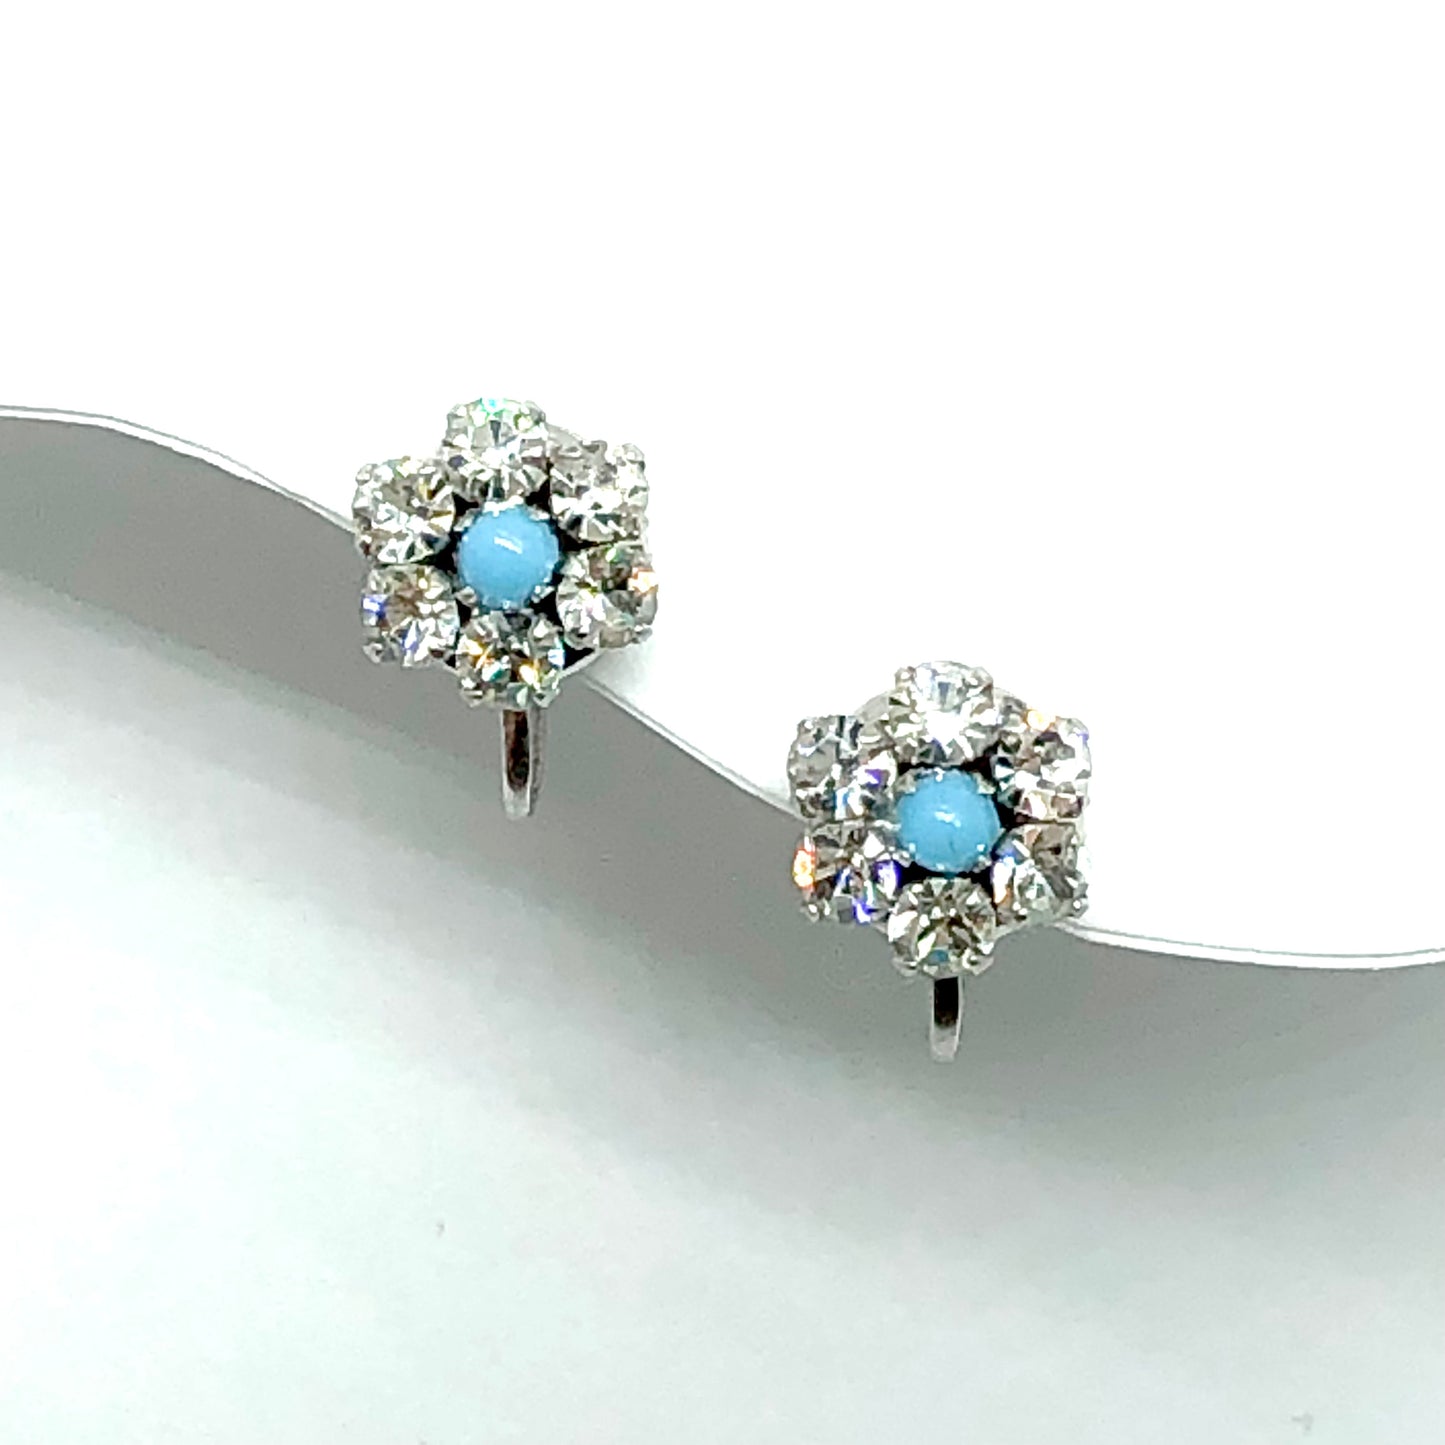 Vintage Jewelry | Sterling Silver Sparkling Rhinestone Turquoise Cluster Clip-On Earrings 